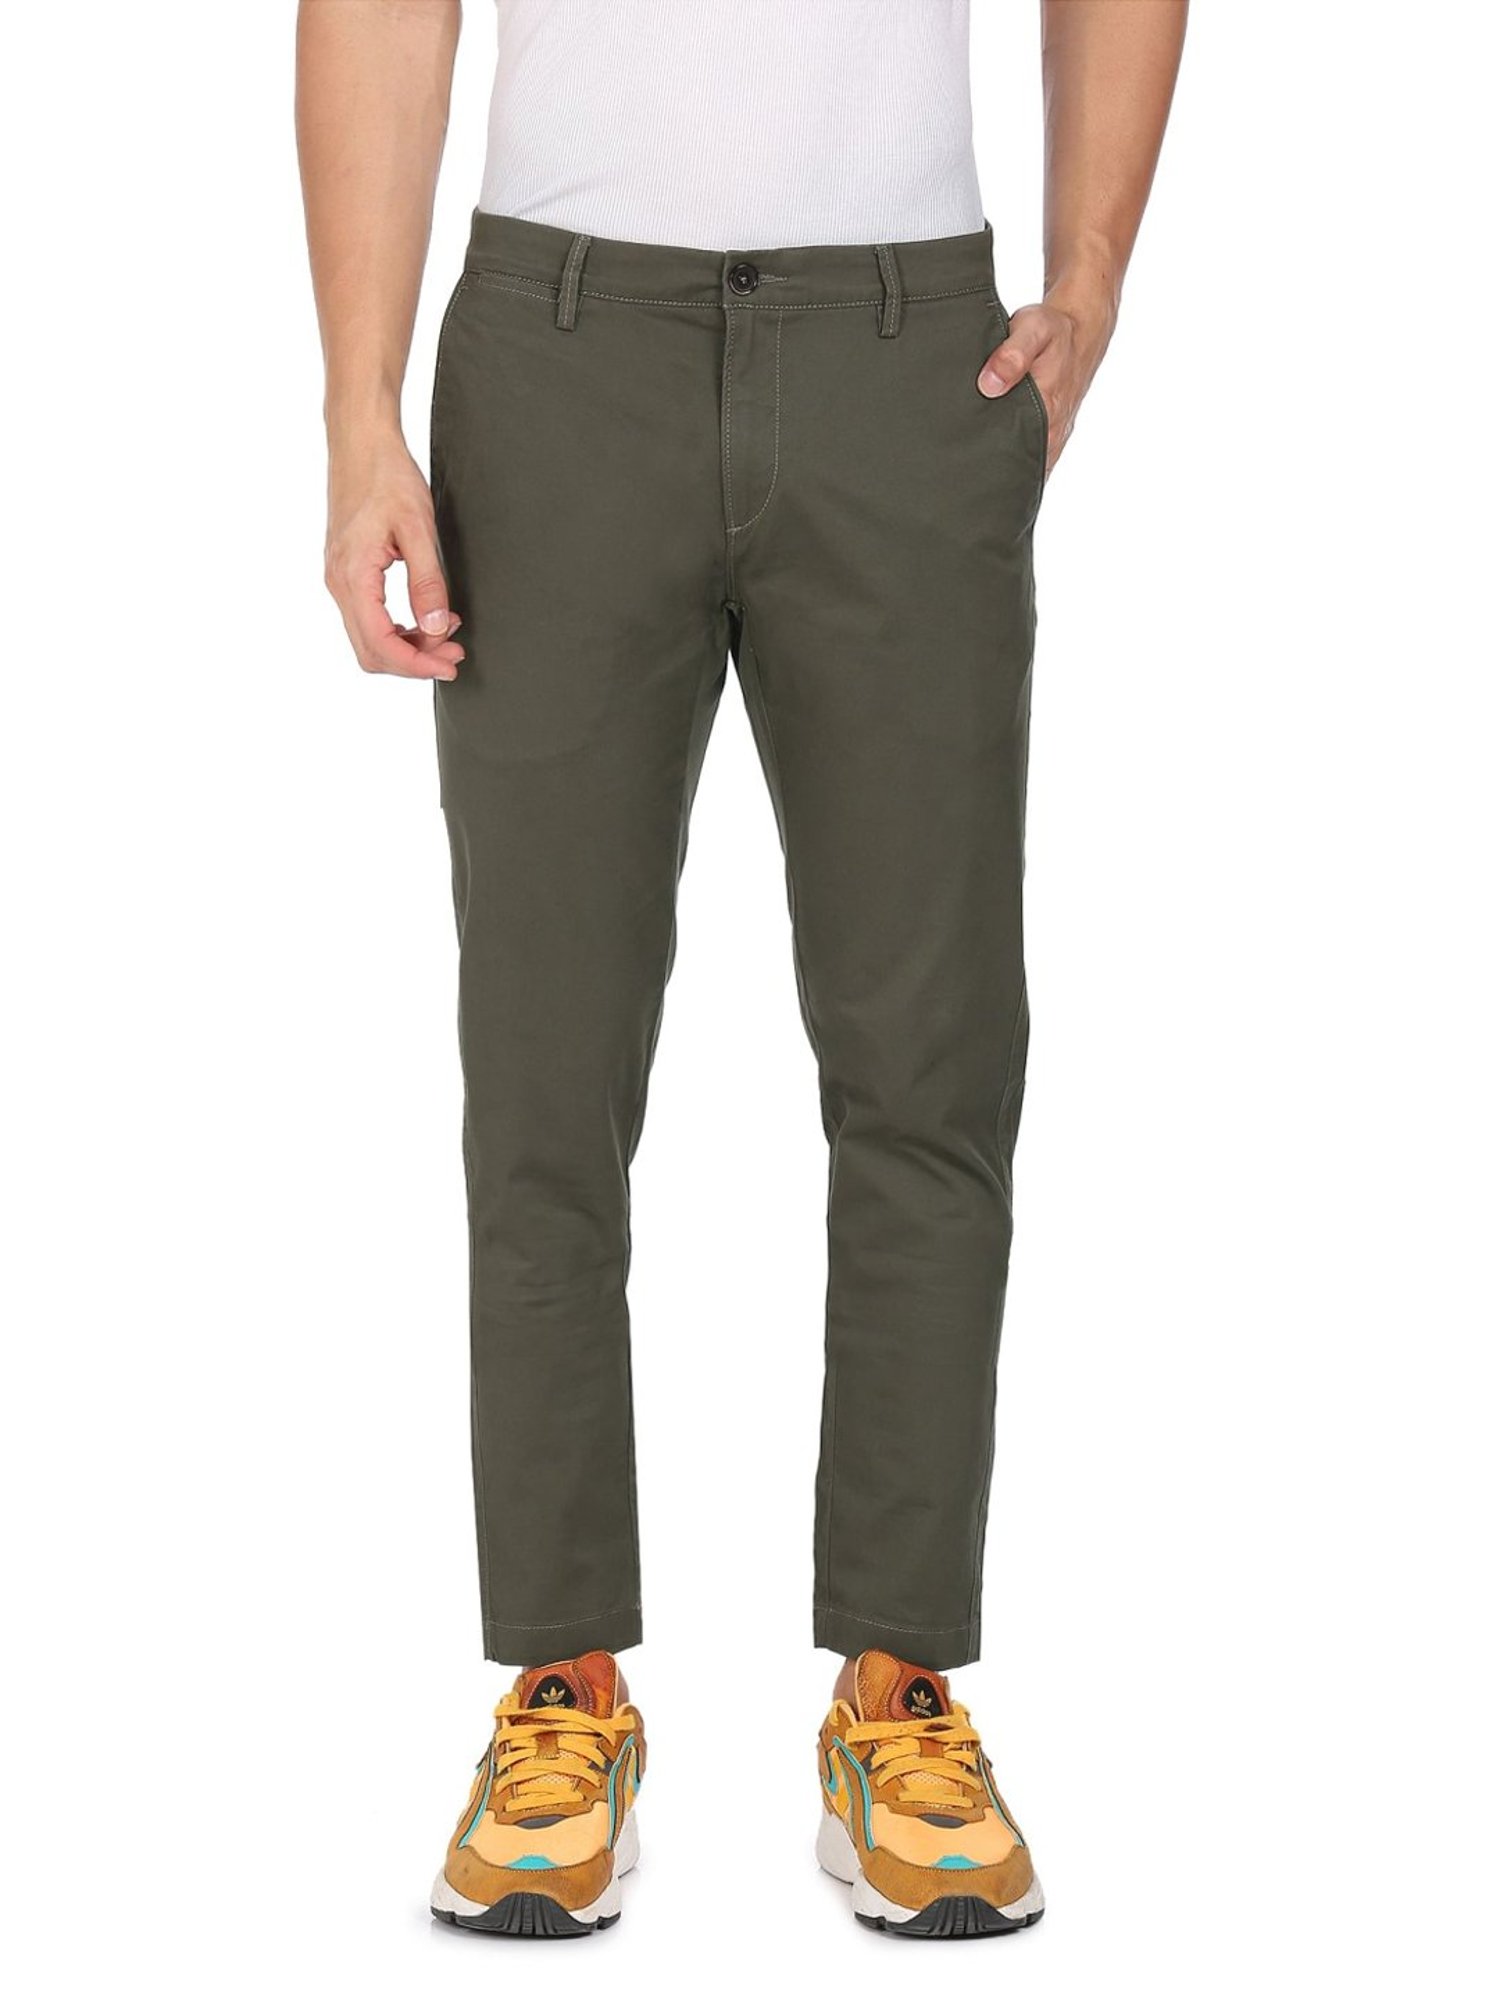 Buy US POLO ASSN Mens Regular Fit Pants USTRO0009Olive Grey30 at  Amazonin